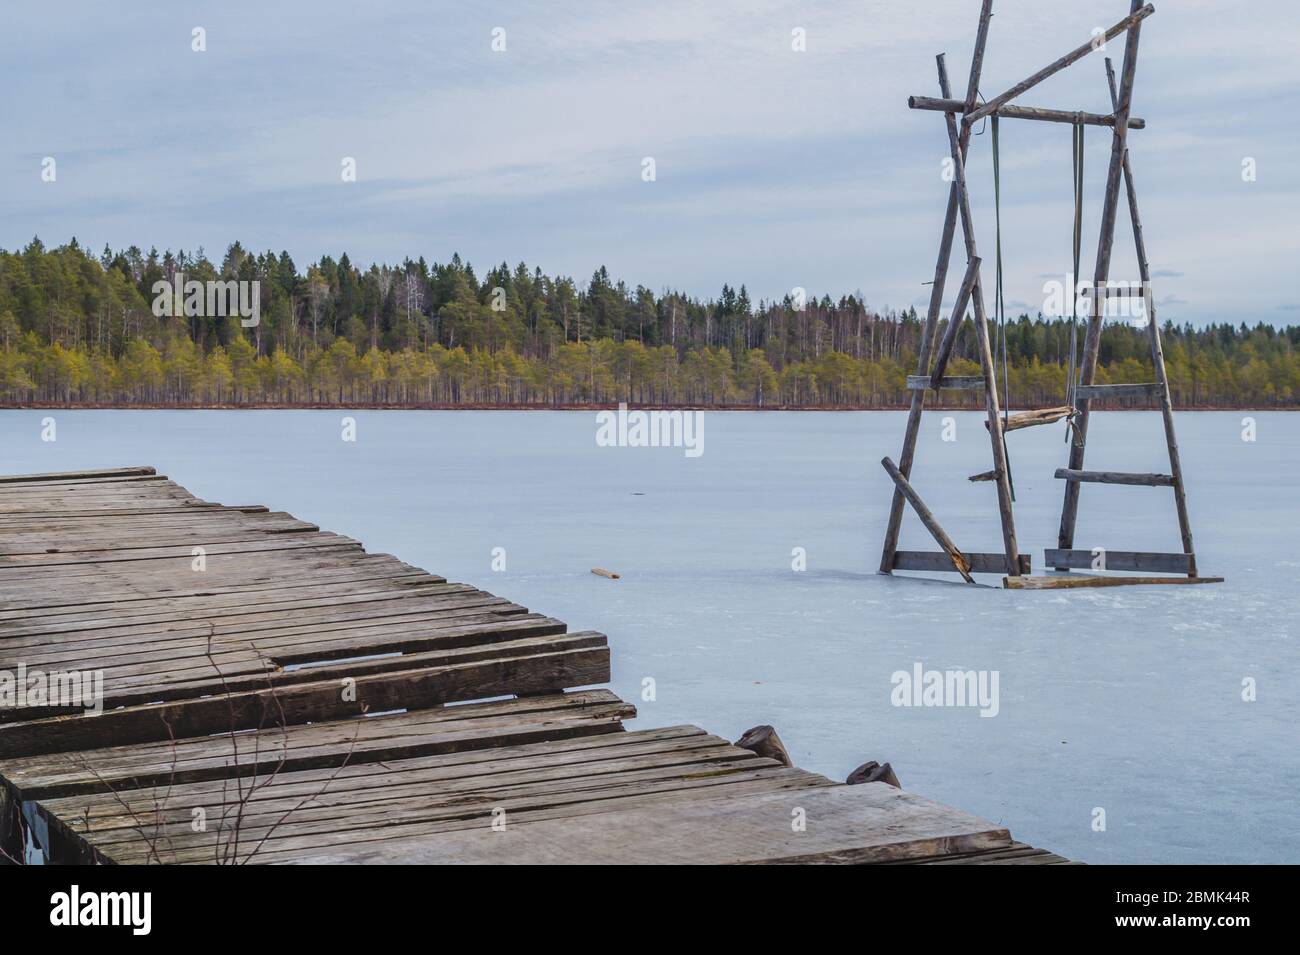 Swing on a frozen lake. solitude concept. wooden pier on the shore. nature landscape Stock Photo